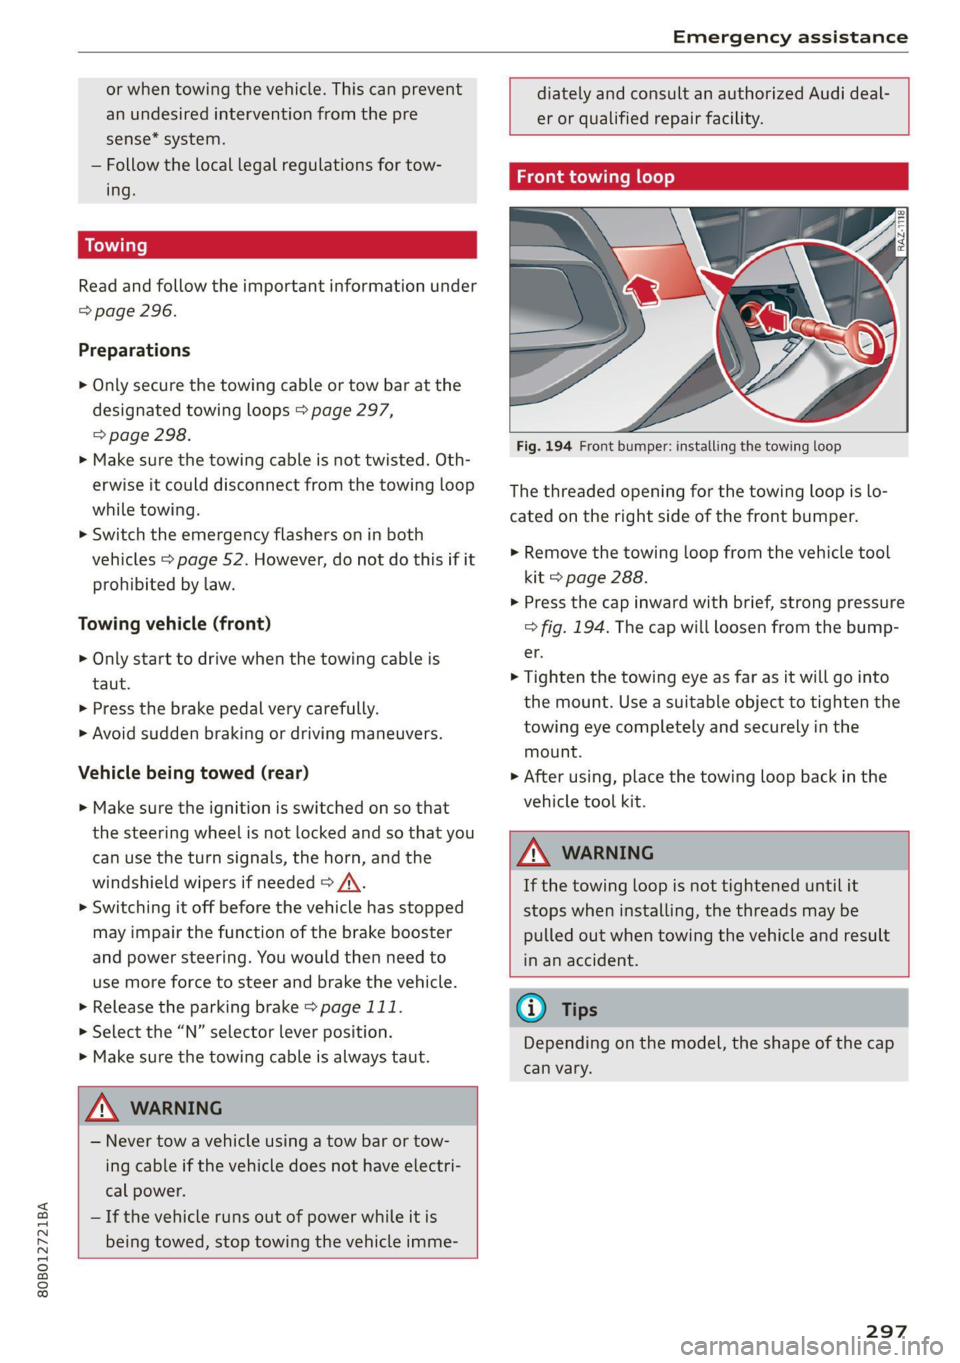 AUDI Q5 2021  Owner´s Manual 80B012721BA 
Emergency assistance 
  
or when towing the vehicle. This can prevent 
an undesired intervention from the pre 
sense* system. 
— Follow the local legal regulations for tow- 
ing. 
Read 